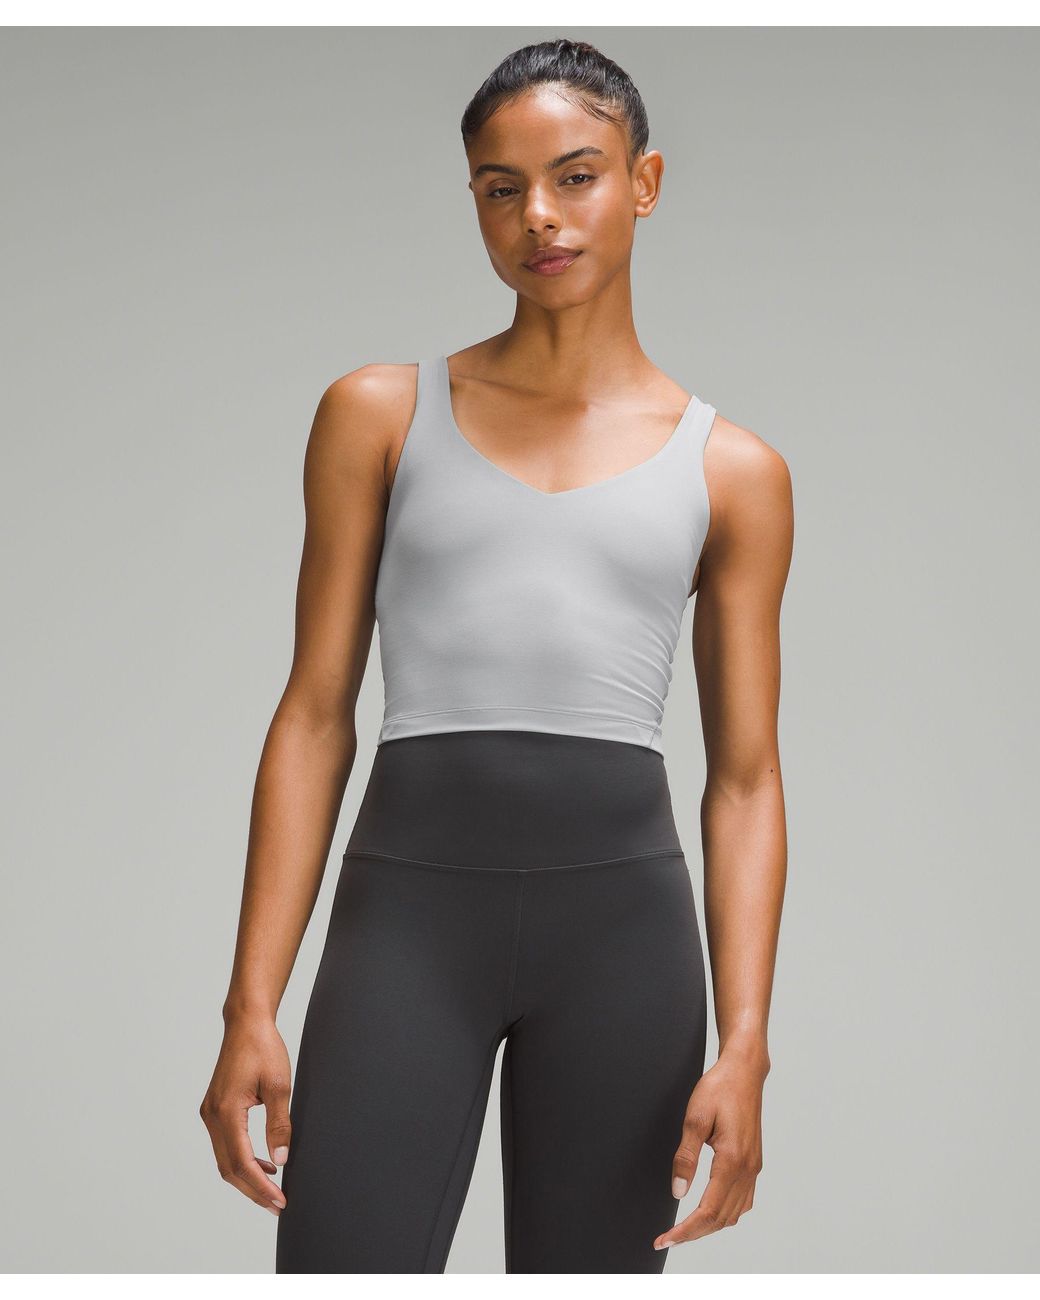 lululemon athletica Align Tank Top - Color Grey - Size 14 in Gray